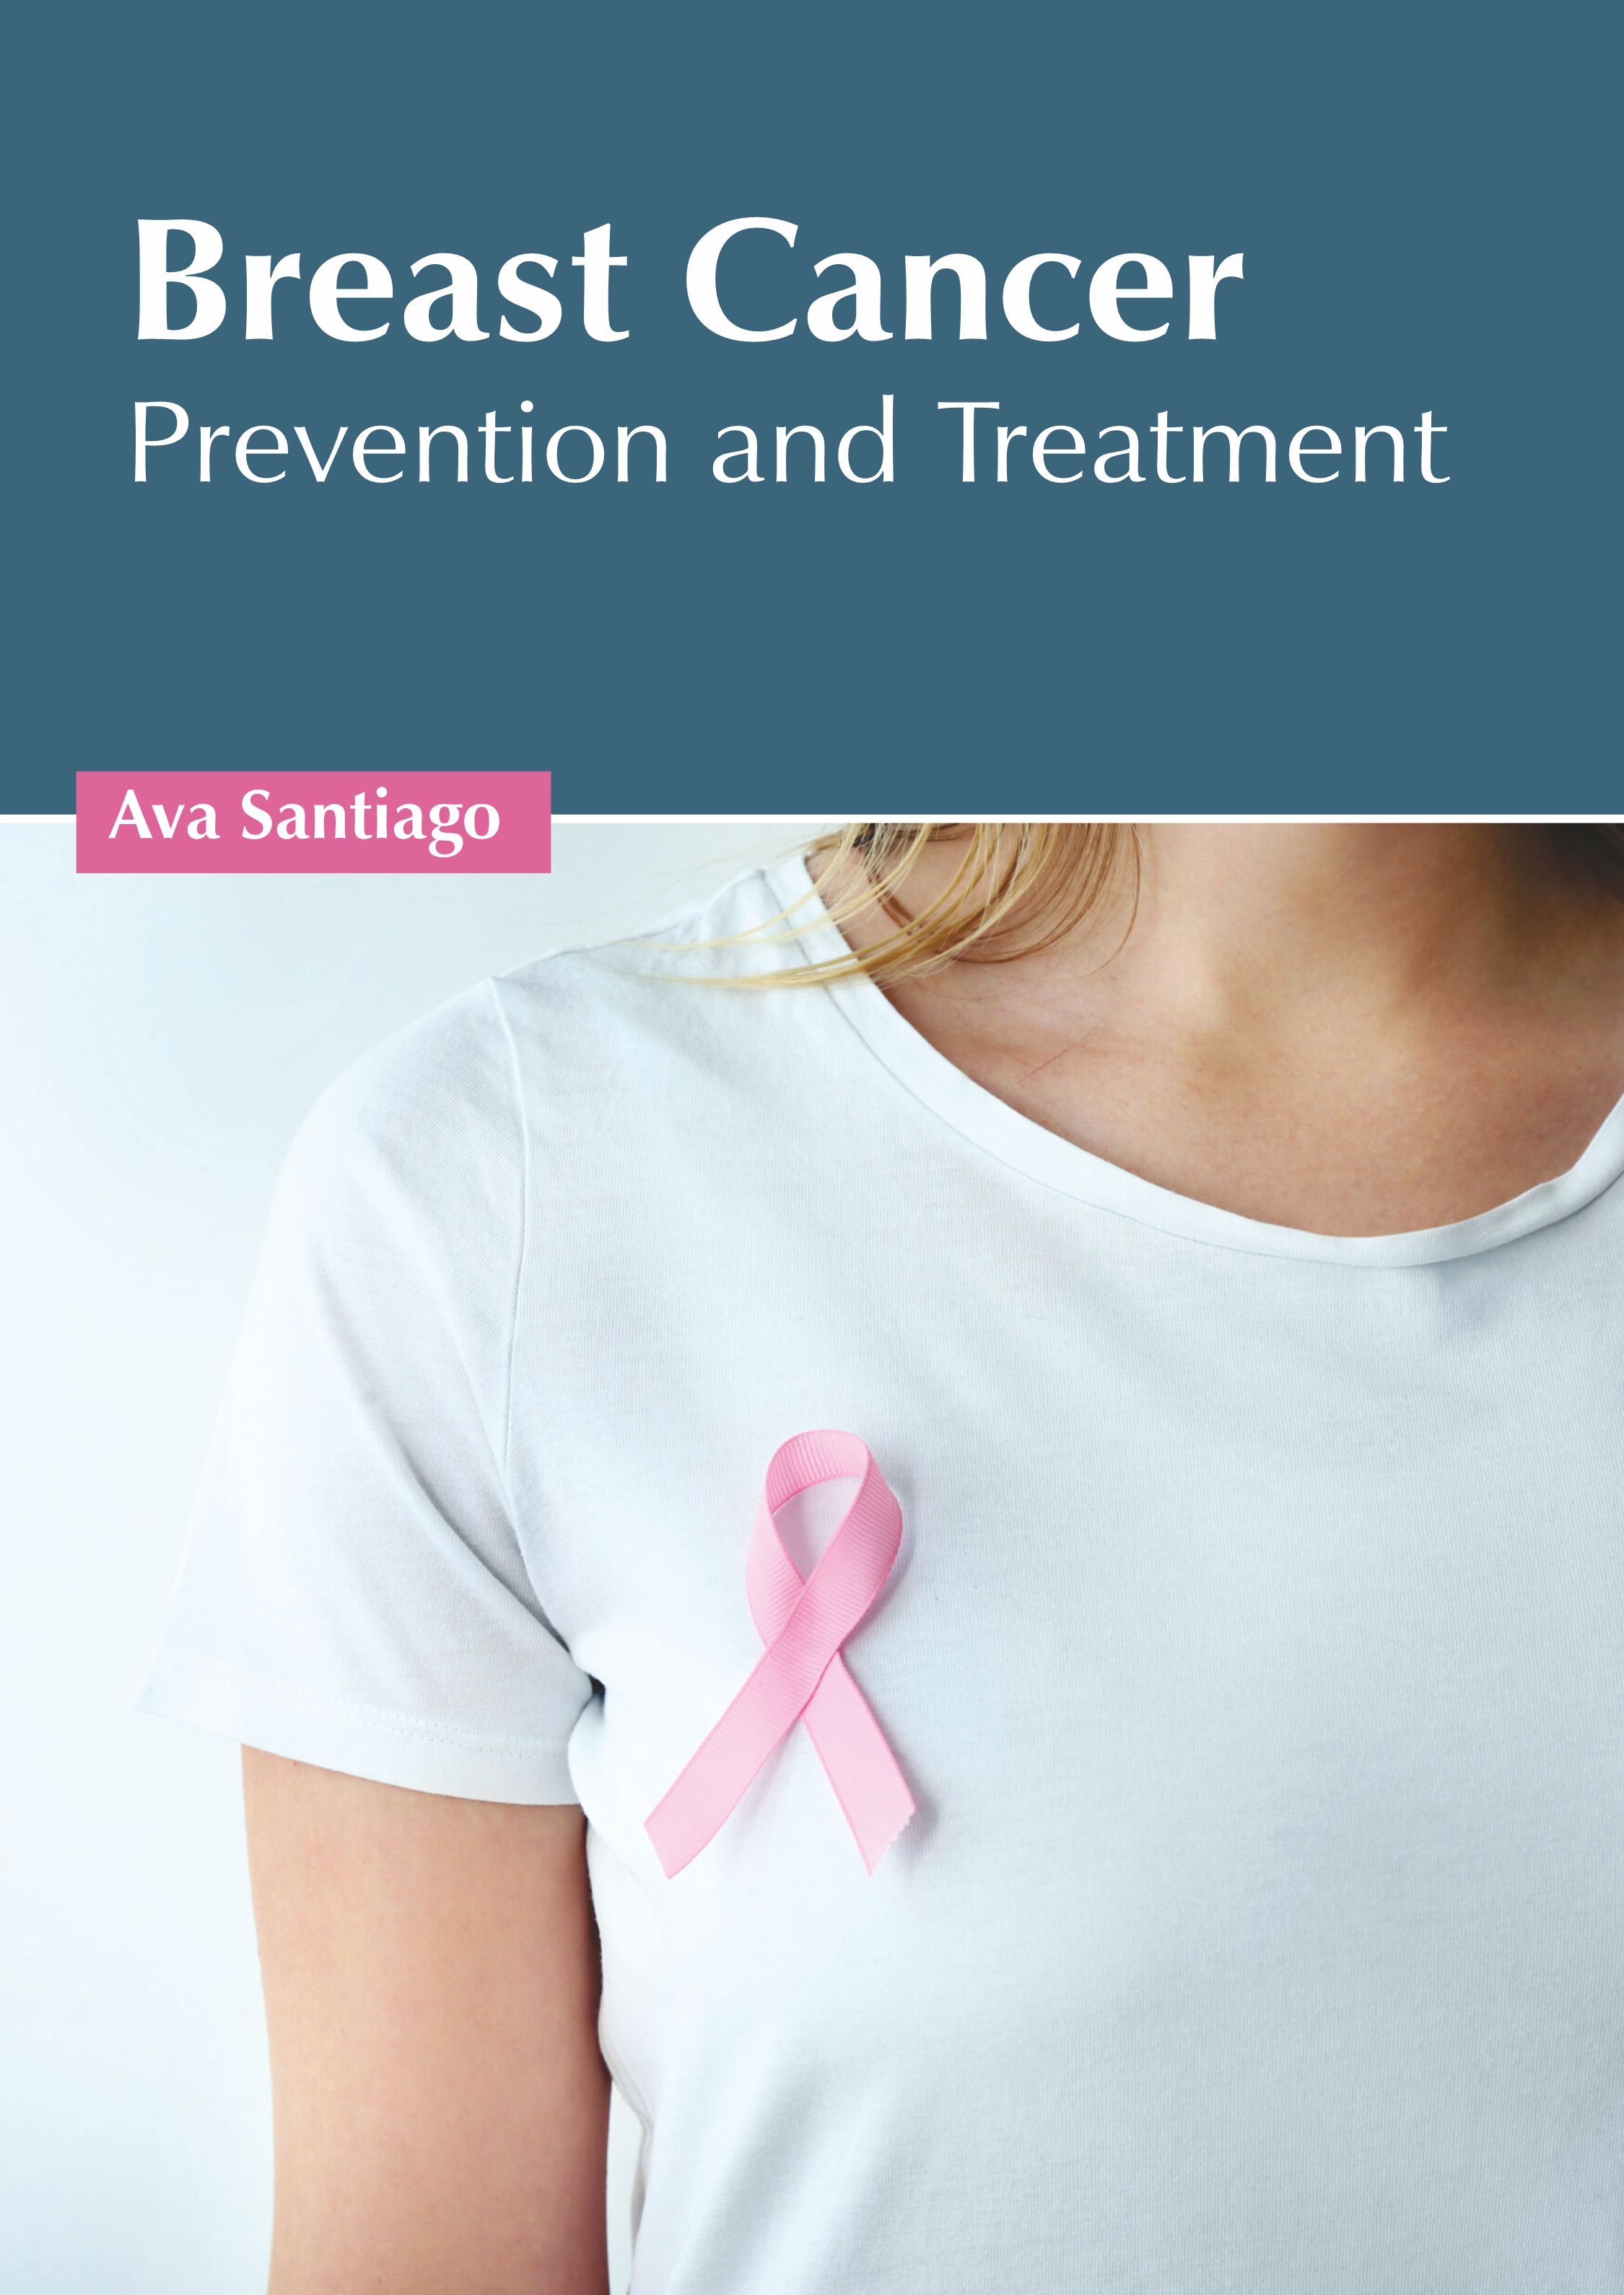 BREAST CANCER: PREVENTION AND TREATMENT